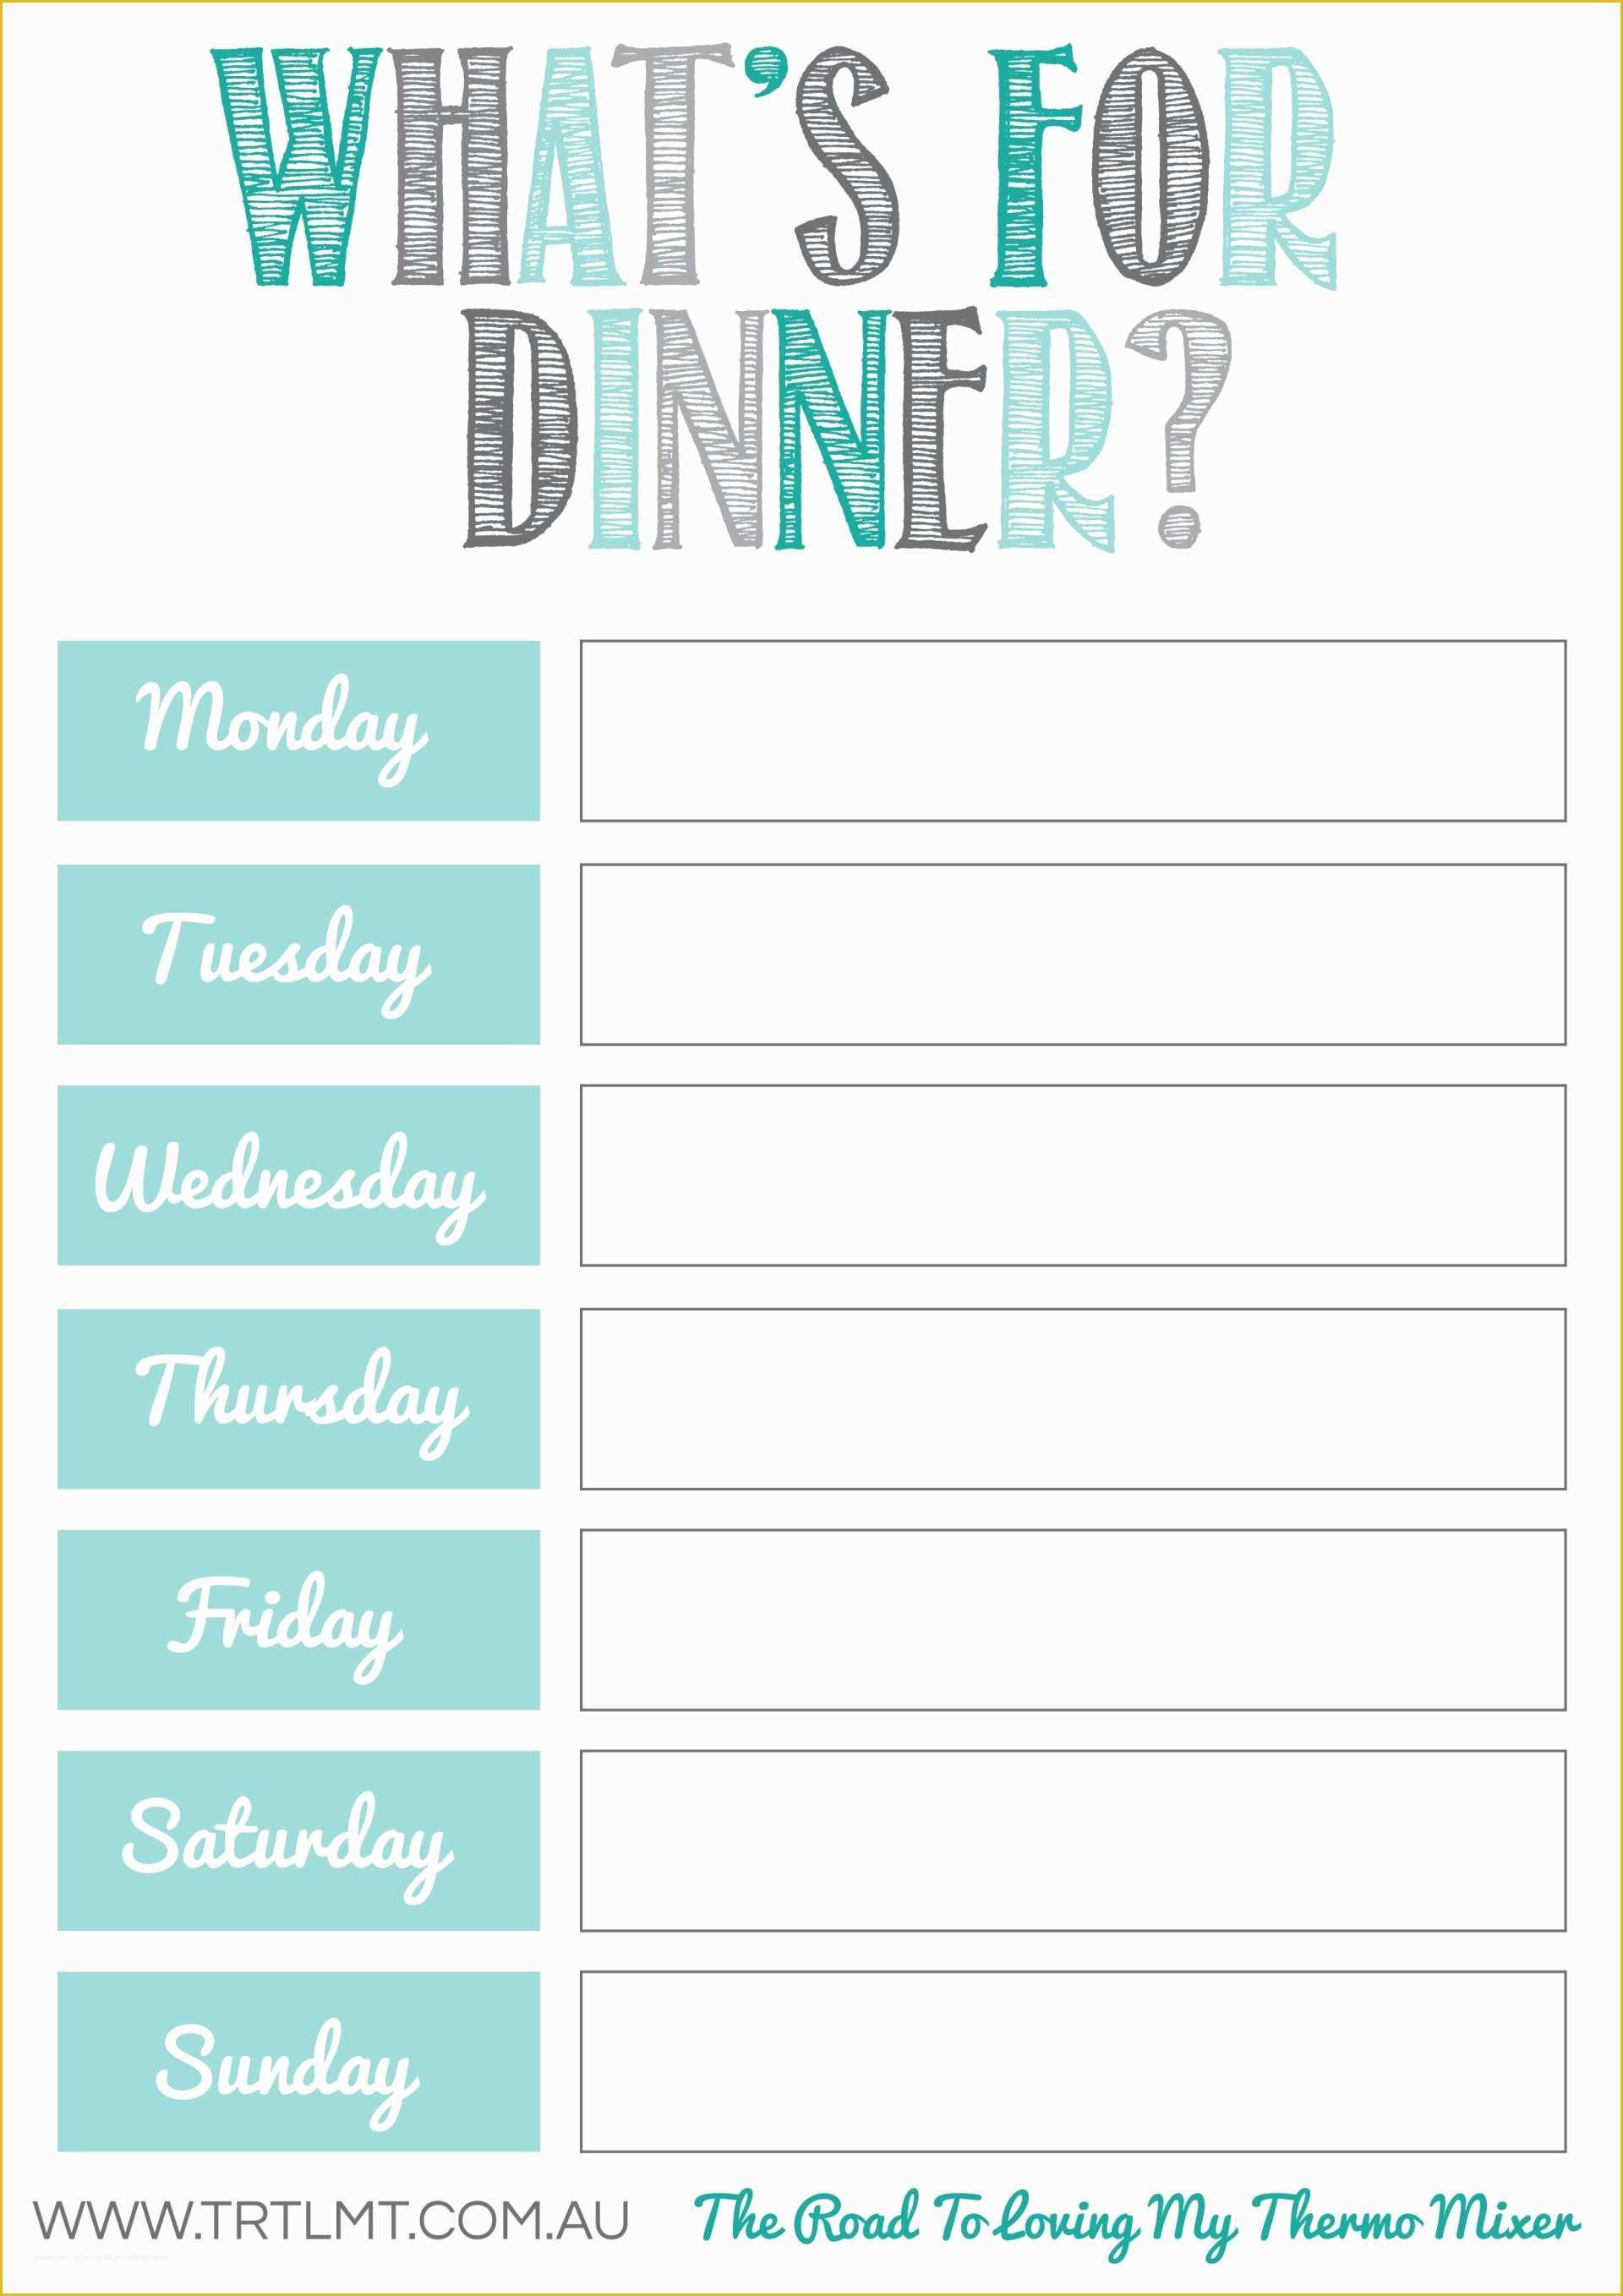 Free Weekly Meal Planner Template with Grocery List Of What S for Dinner 2 Fb organization